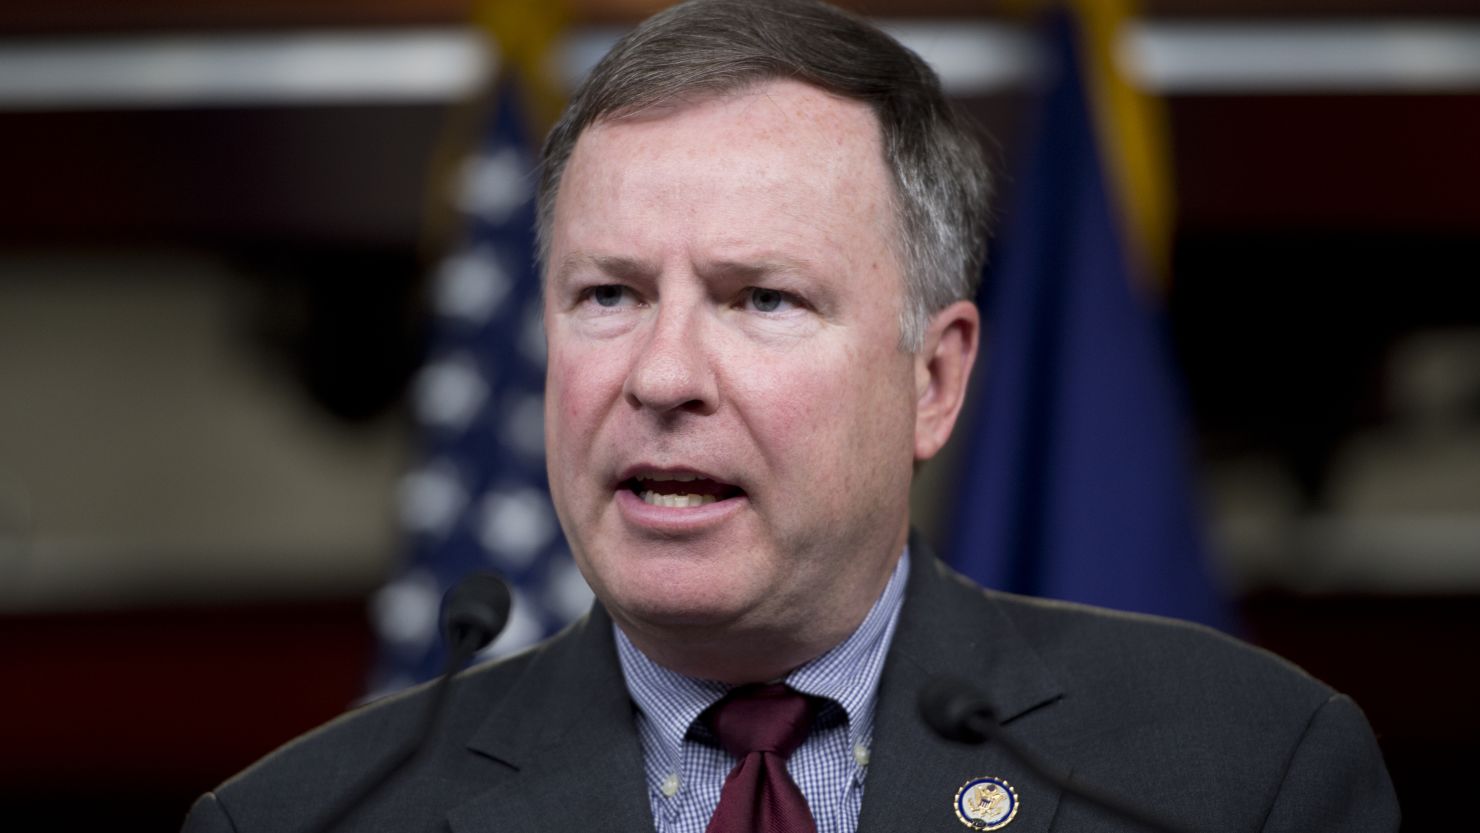 The Colorado Supreme Court ruled Monday that Republican Rep. Doug Lamborn should be removed from the primary ballot due to problems with the petitions he submitted to qualify for office. 